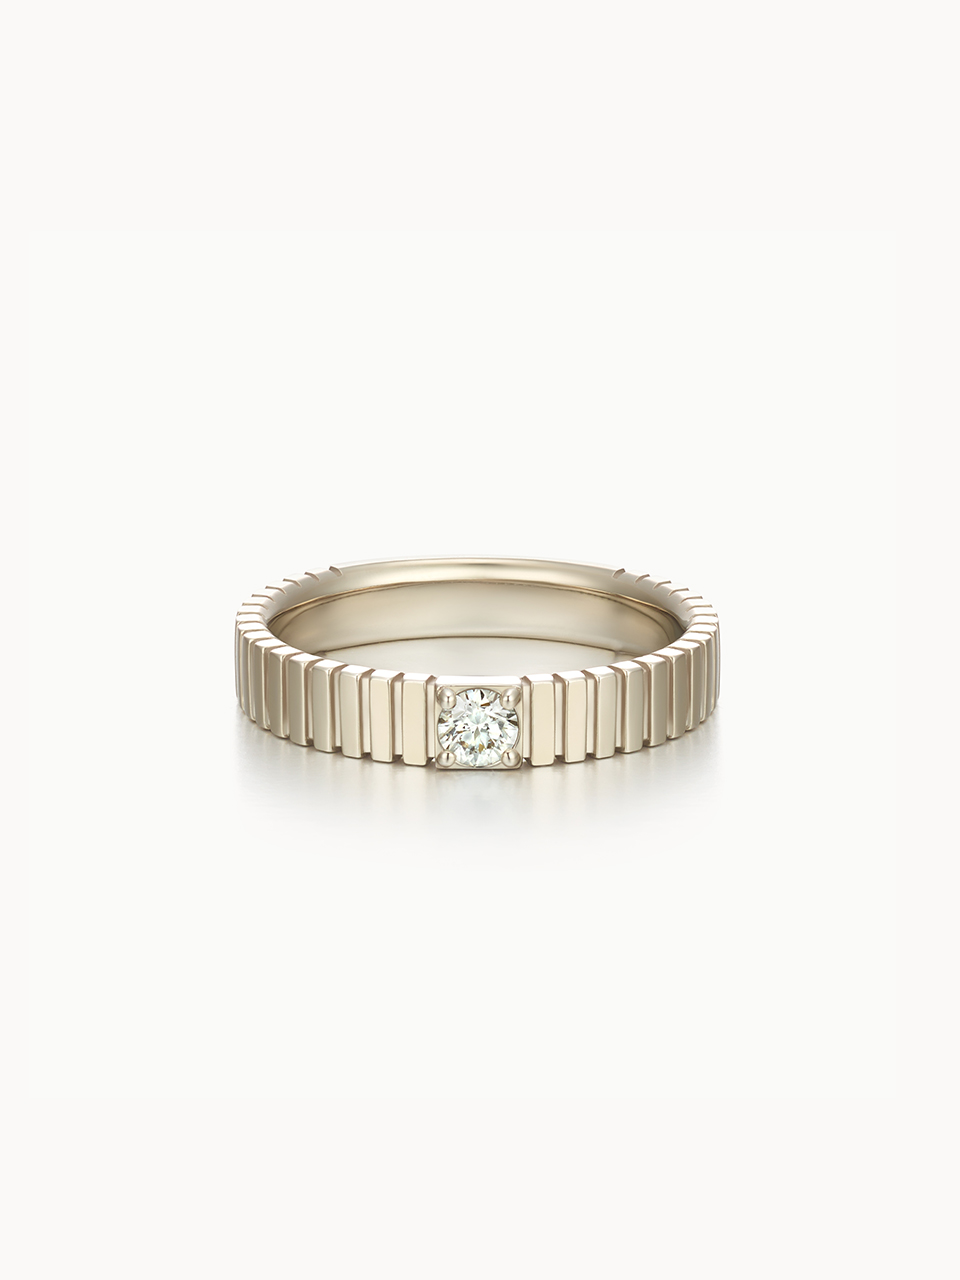 Our Moment Ring-0.1ct